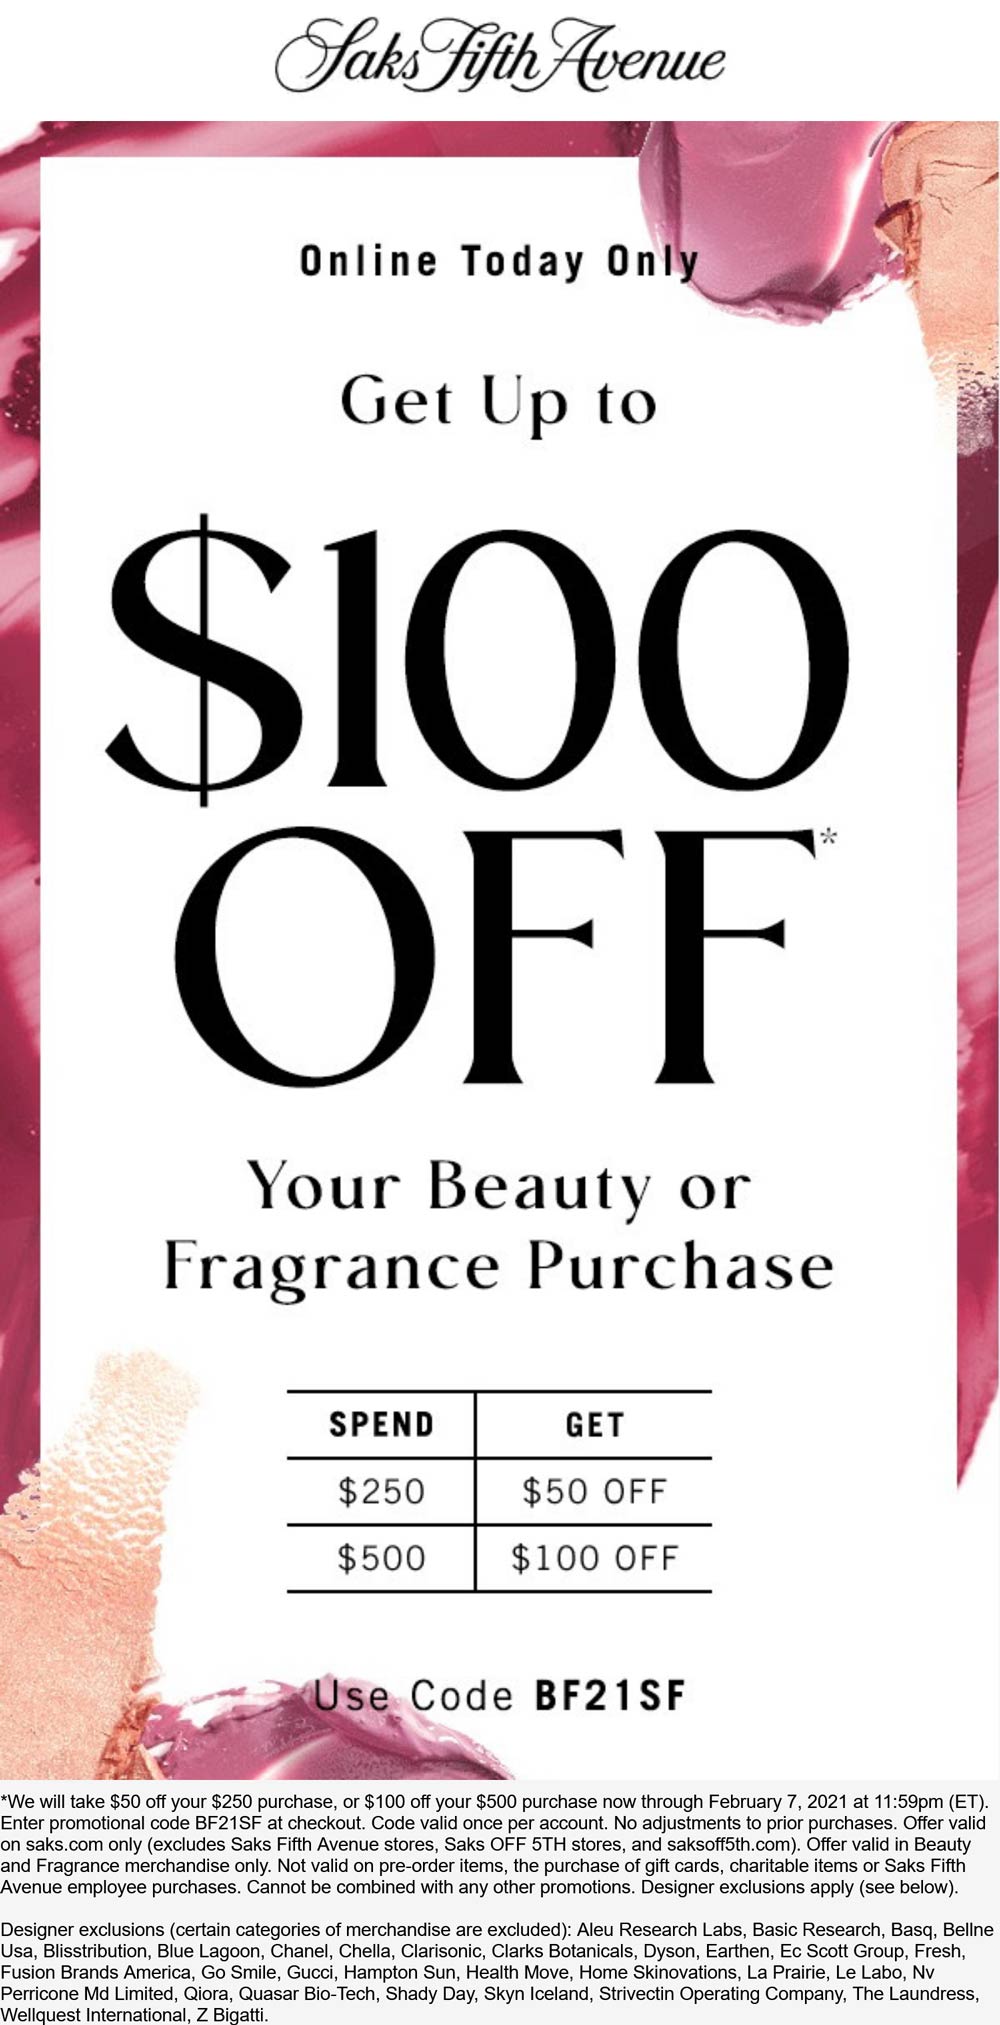 50100 off 250+ on beauty or fragrance today at Saks Fifth Avenue